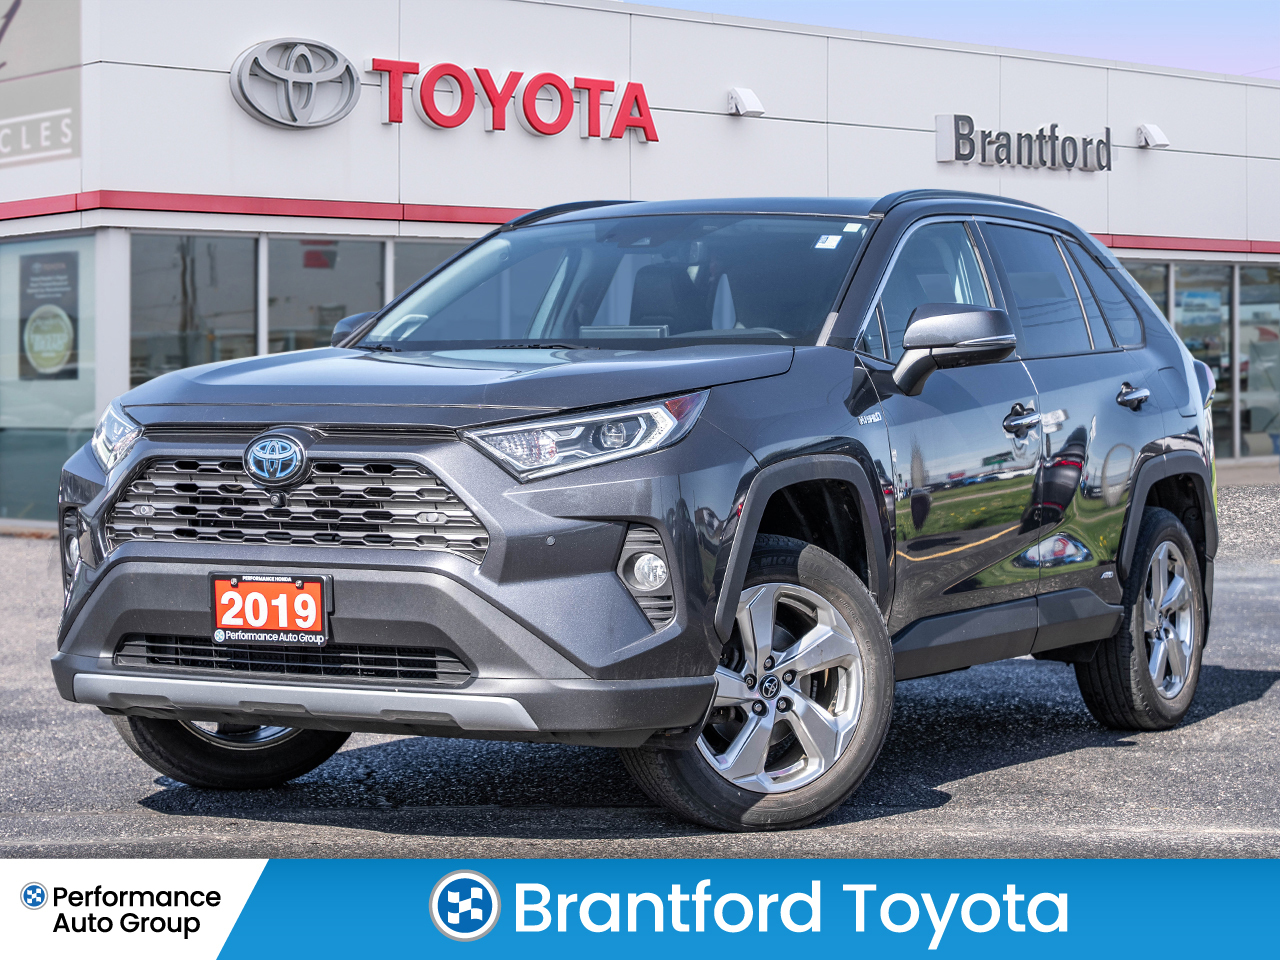 2019 Toyota RAV4 AWD Hybrid WITH LIMITED TRIM AND MICHELIN WINTERS